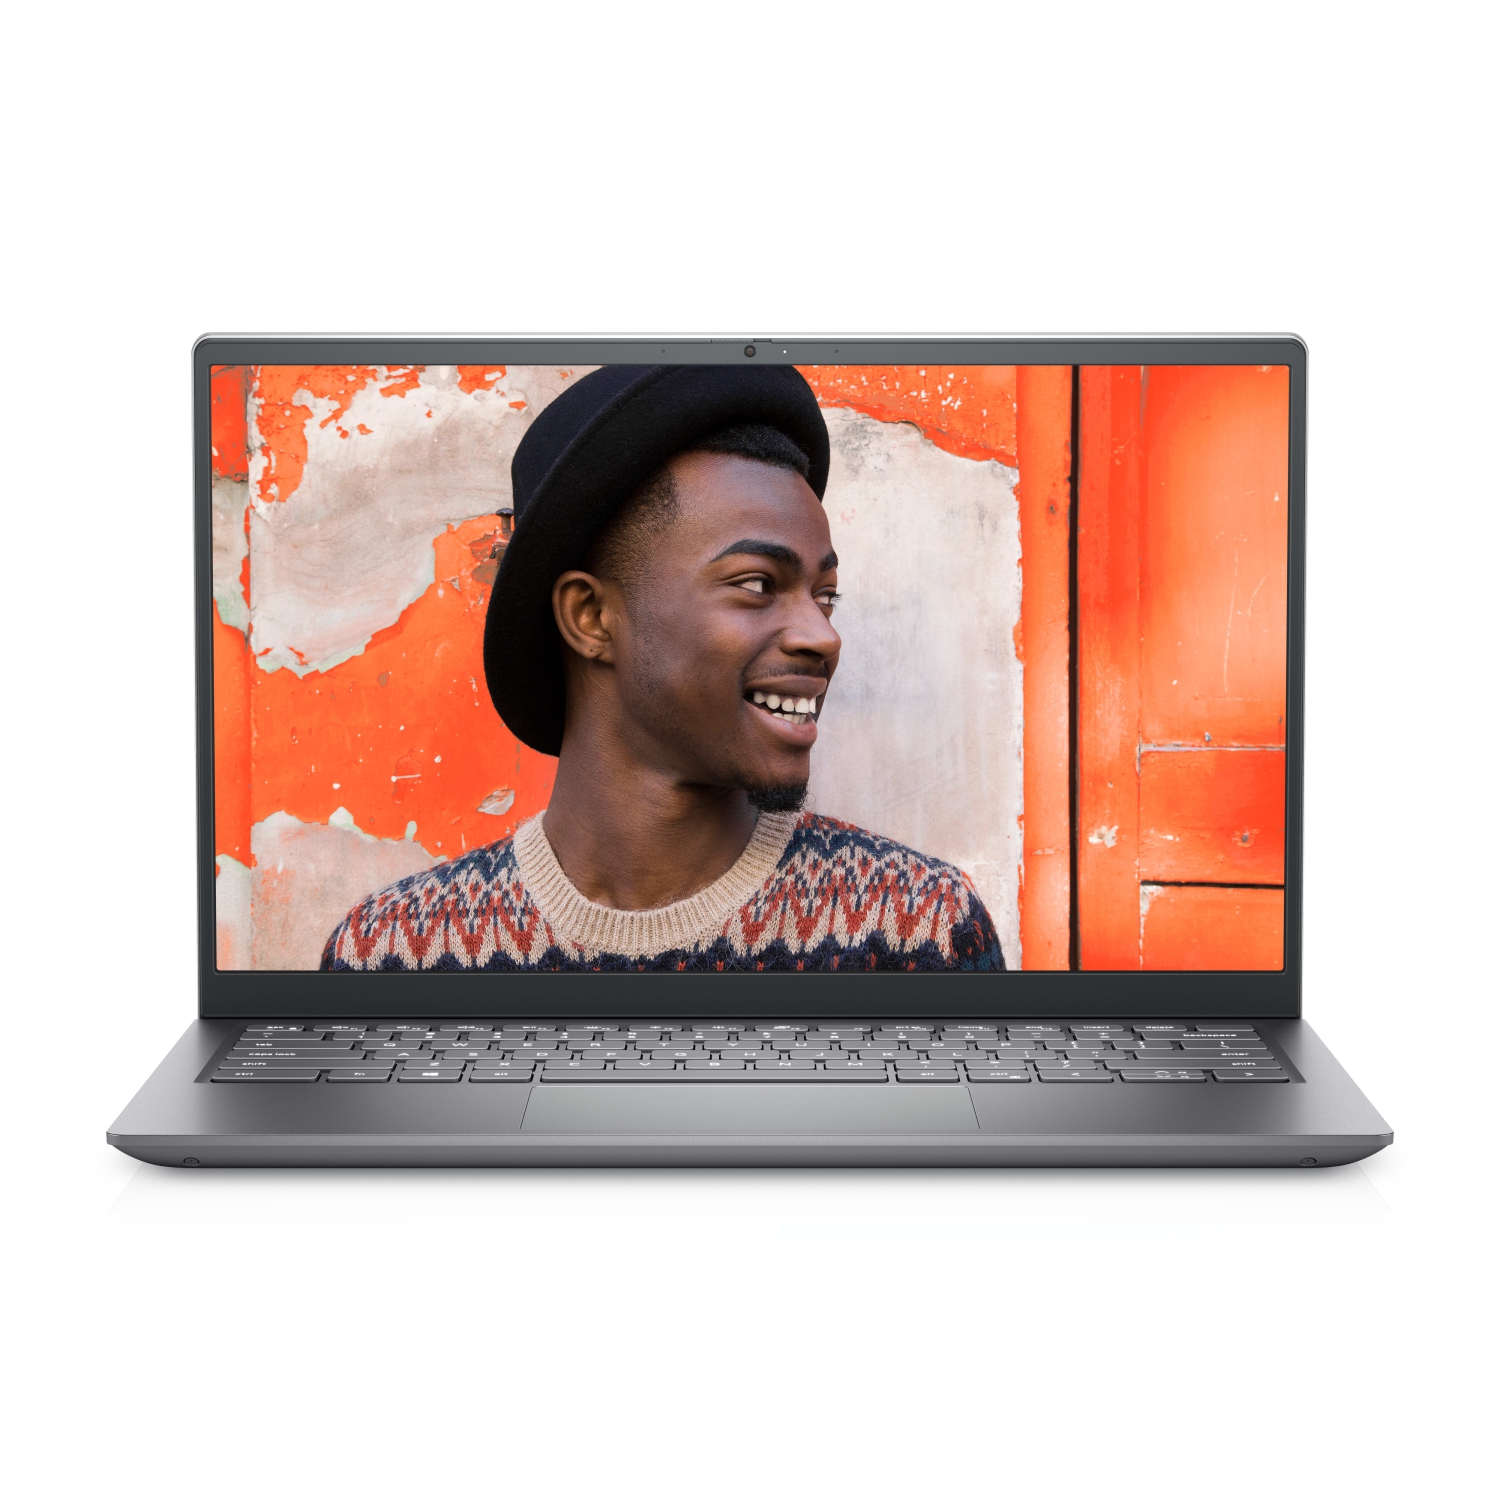 Refurbished (Excellent) – Dell Inspiron 5410 Laptop (2021) | 14" FHD | Core i7 - 1TB SSD - 16GB RAM | 4 Cores @ 4.8 GHz - 11th Gen CPU